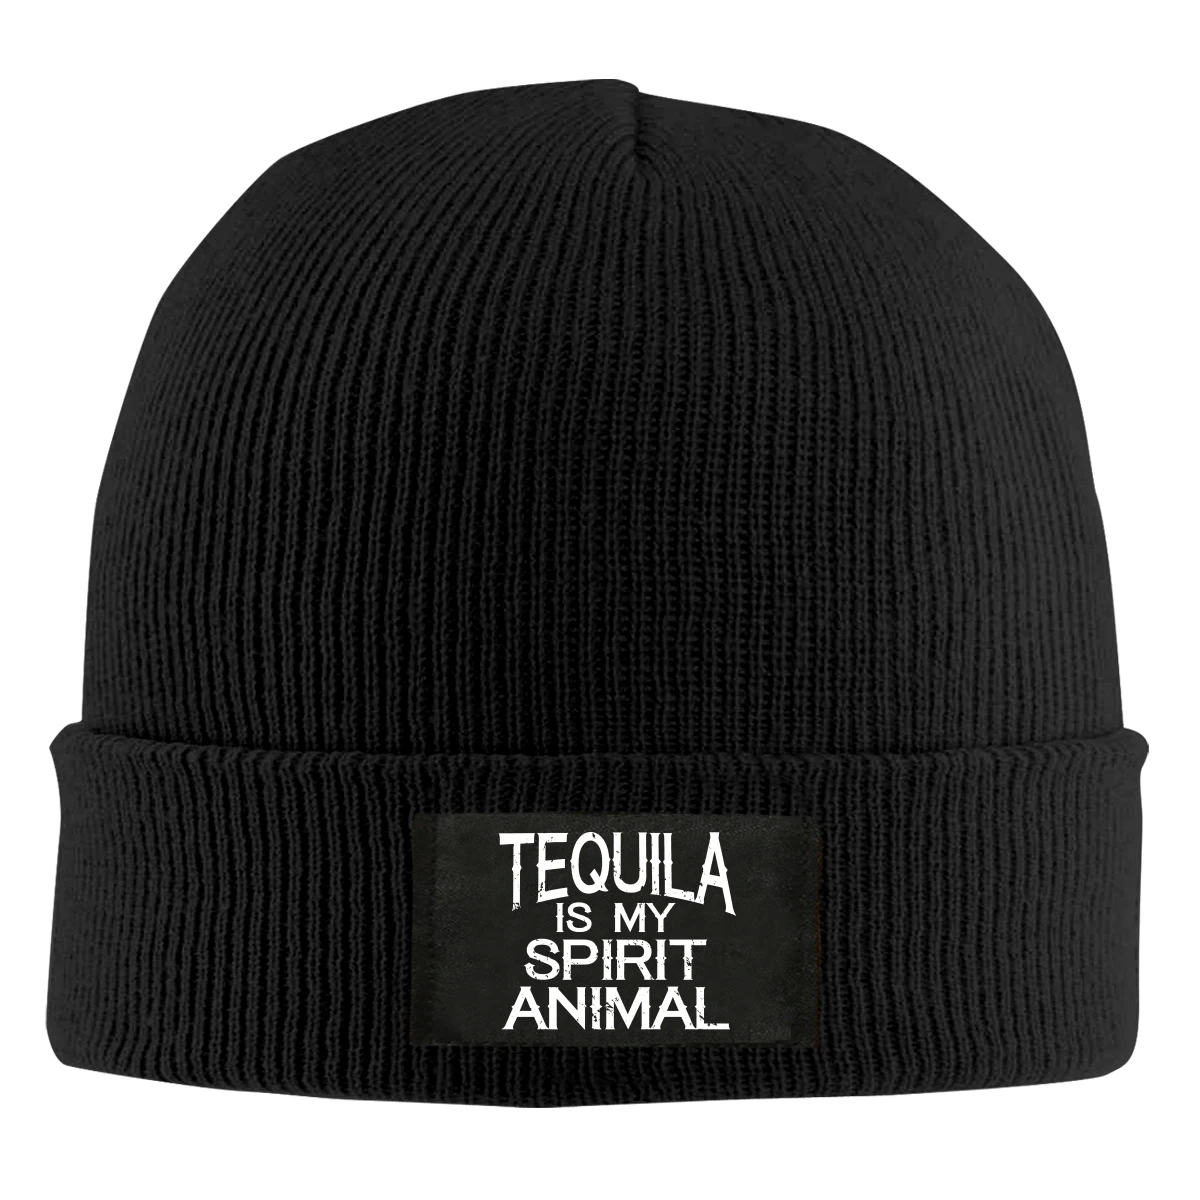 Tequila Is My Spirit Beanie Hats For Men Women With Designs Winter Slouchy Knit Skull Cap